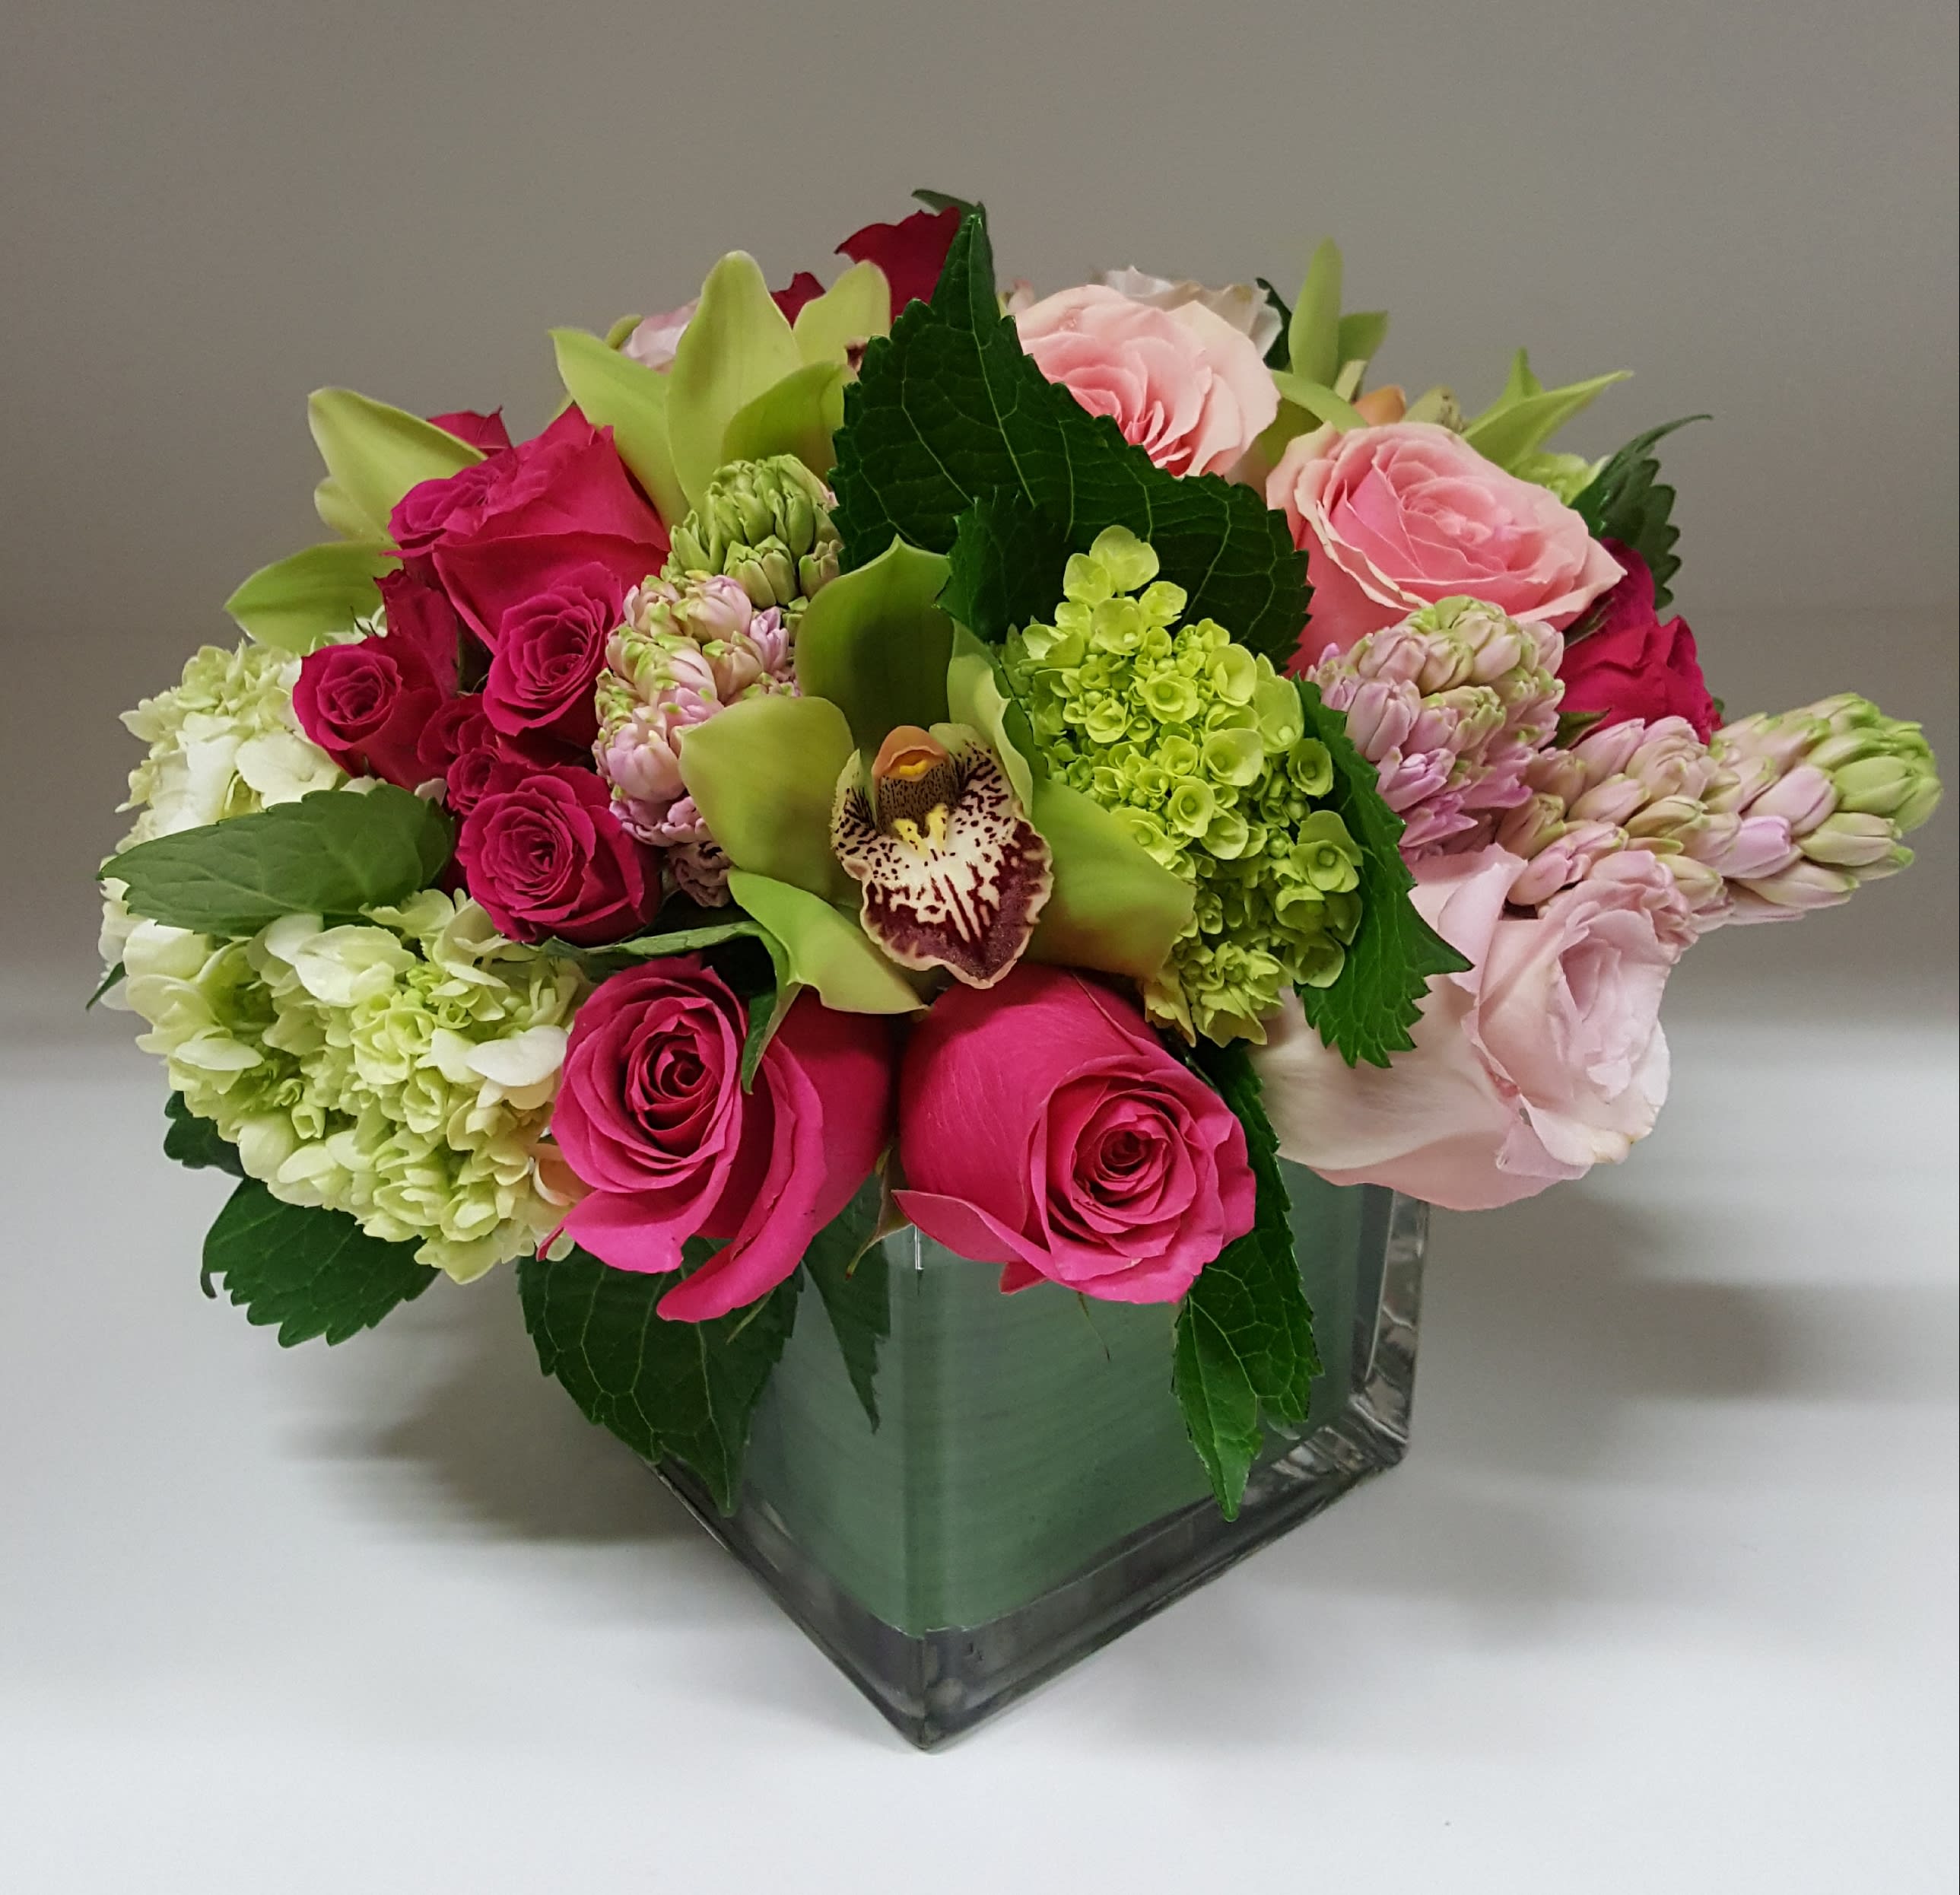 Dragon Fruit - This delightfully vibrant design is created through a contrasting display of fragrant hot pink roses and bright mini green hydrangea alongside with bold green cymbidium orchid blooms set against lighter shades of pink roses and delicate aromatic hyacinth, presented in a 5”x 5” leaf lined clear cube. Approximate dimensions: 11”x 10”